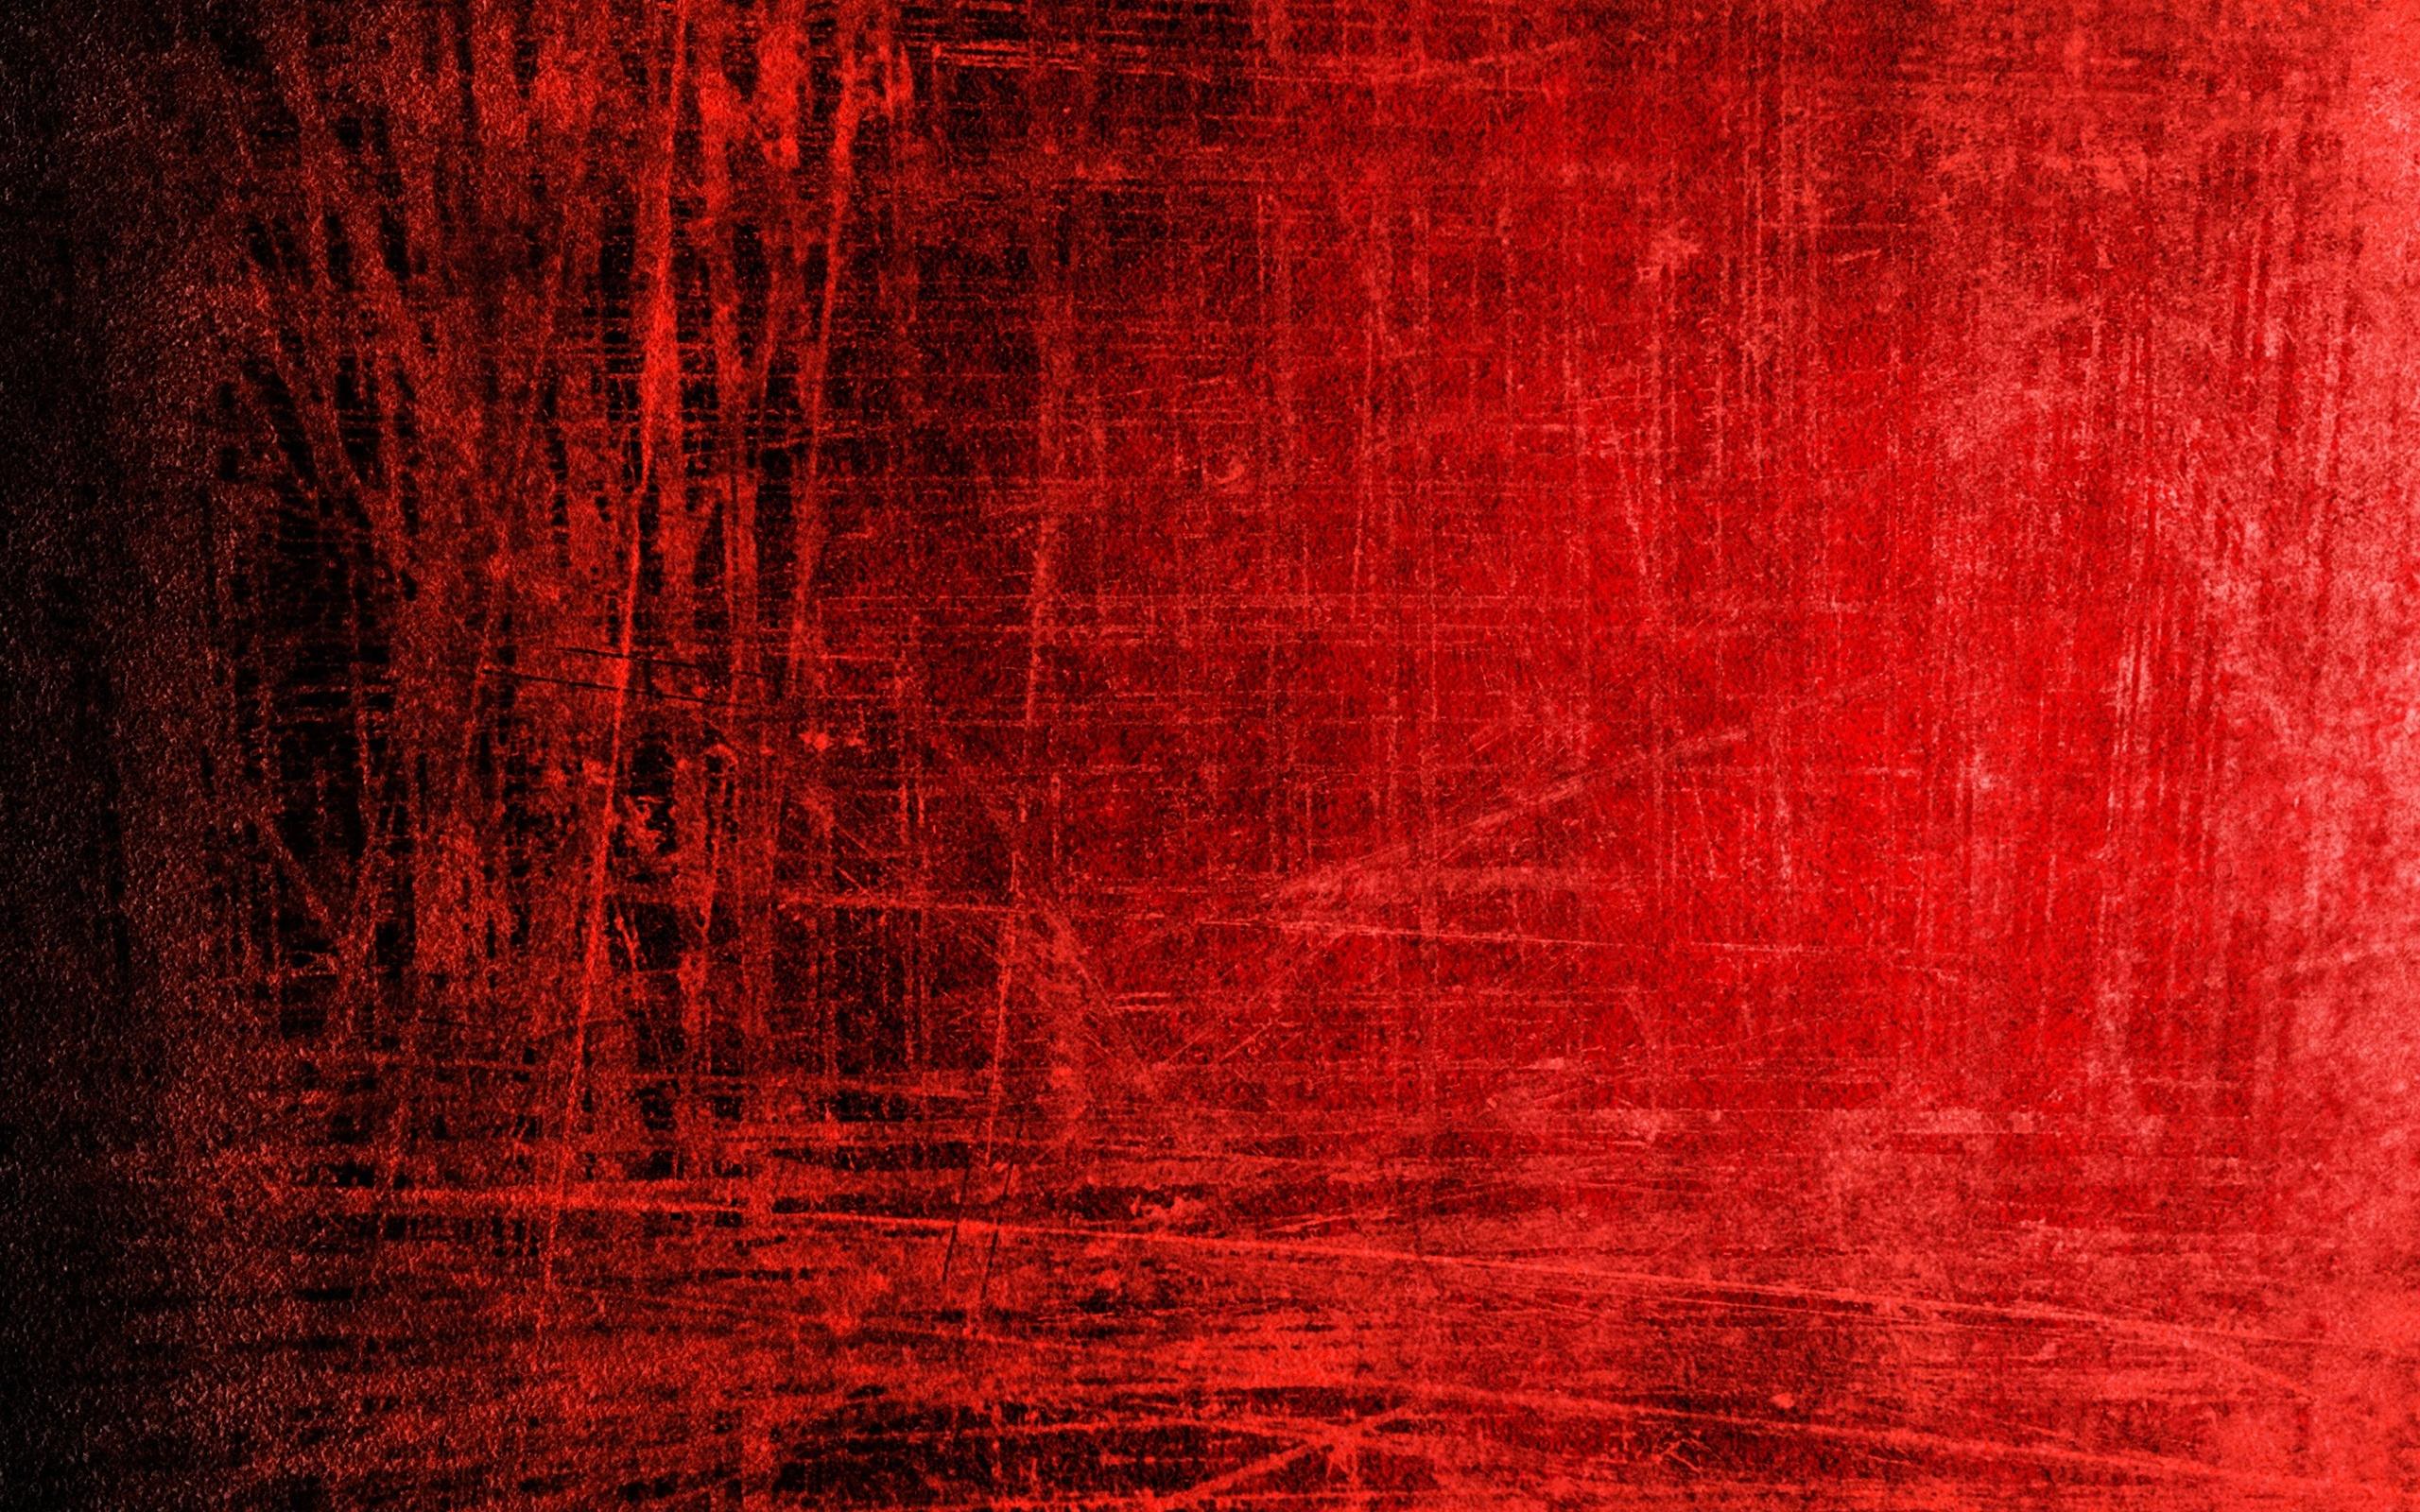 Red Background Fullscreen HD Is High Definition Wallpaper You Can